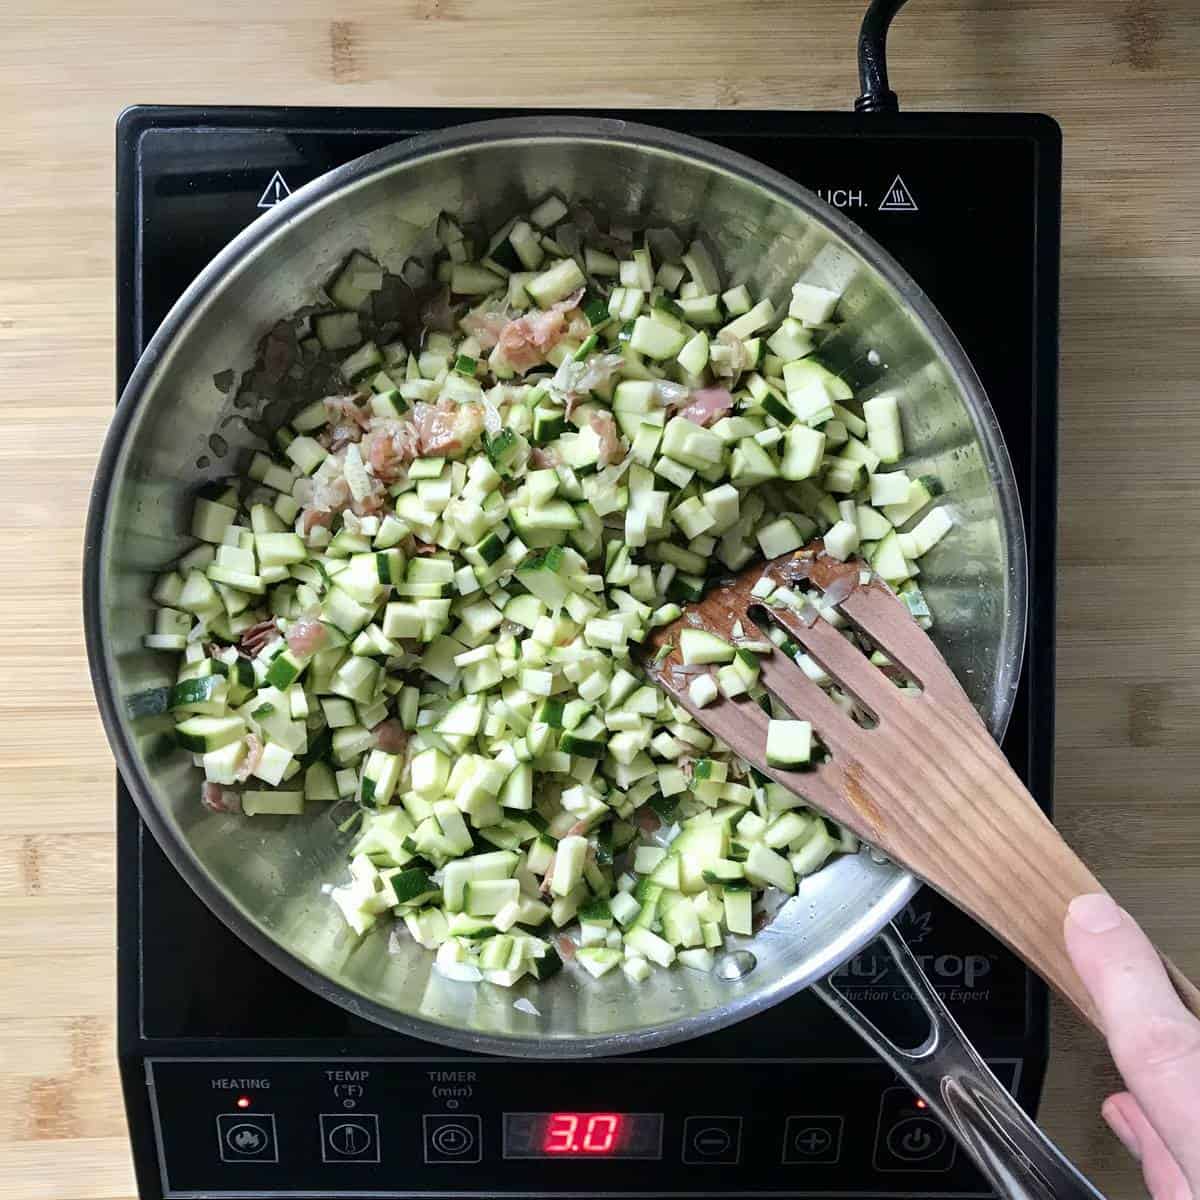 Diced zucchini in the process of being sauteed in a large pan.